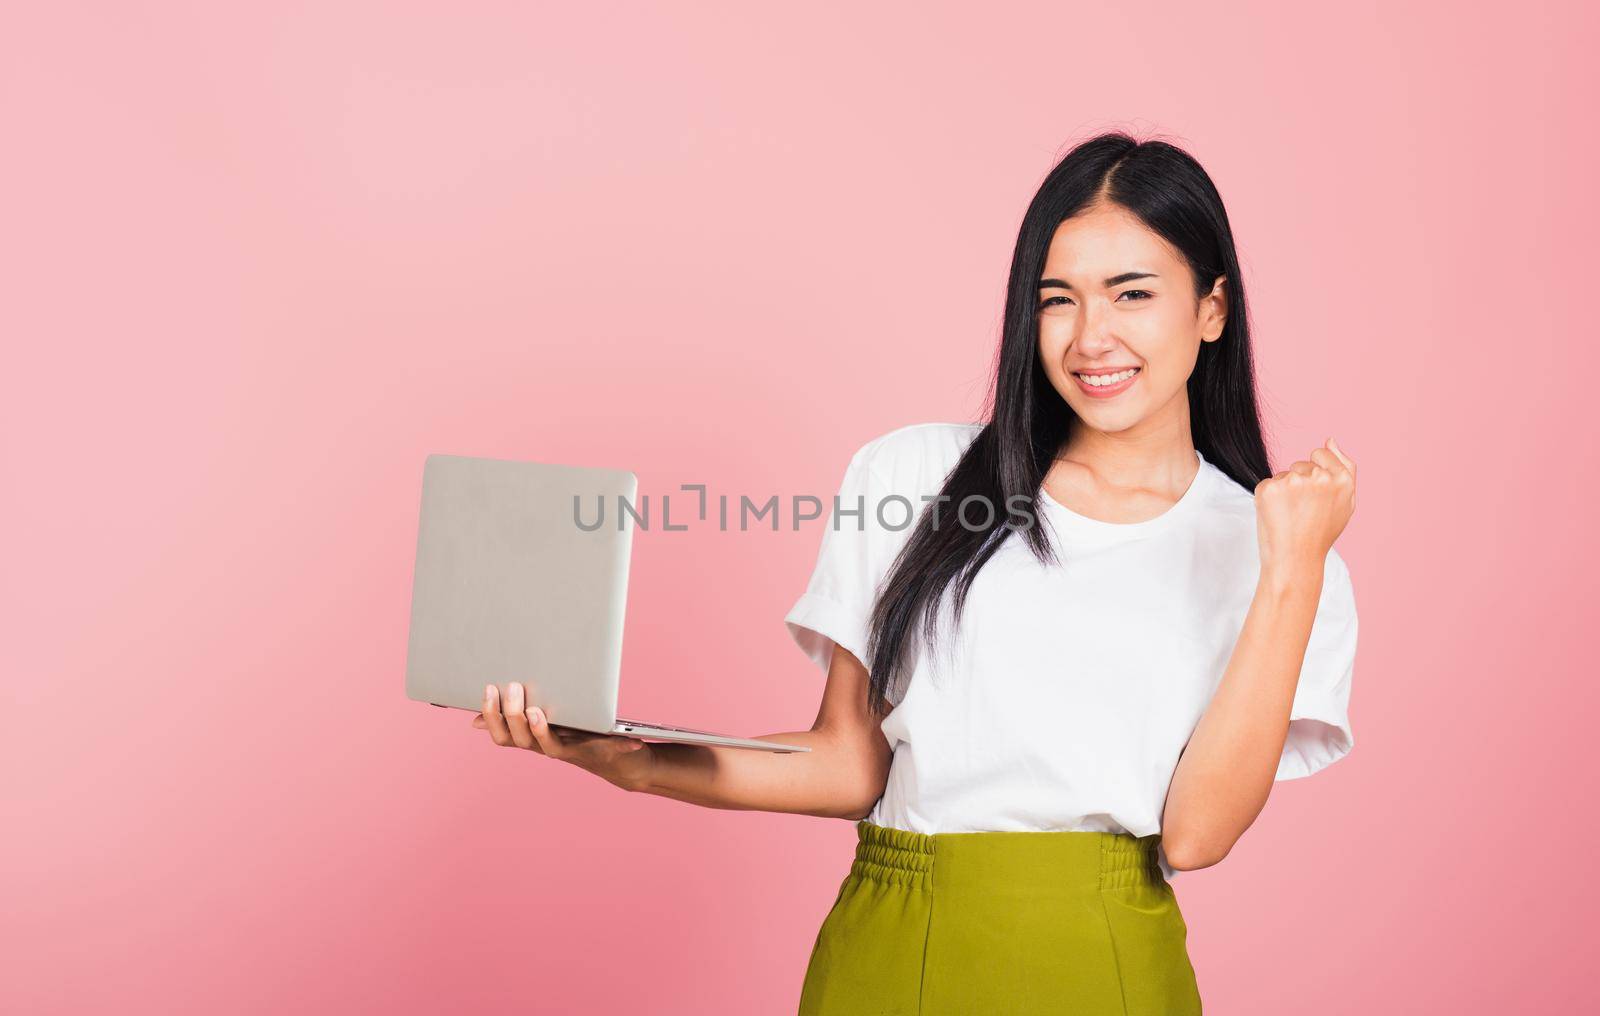 Portrait of happy Asian beautiful young woman teen confident smiling face holding using laptop computer and excited celebrating success, studio shot isolated on pink background, with copy space